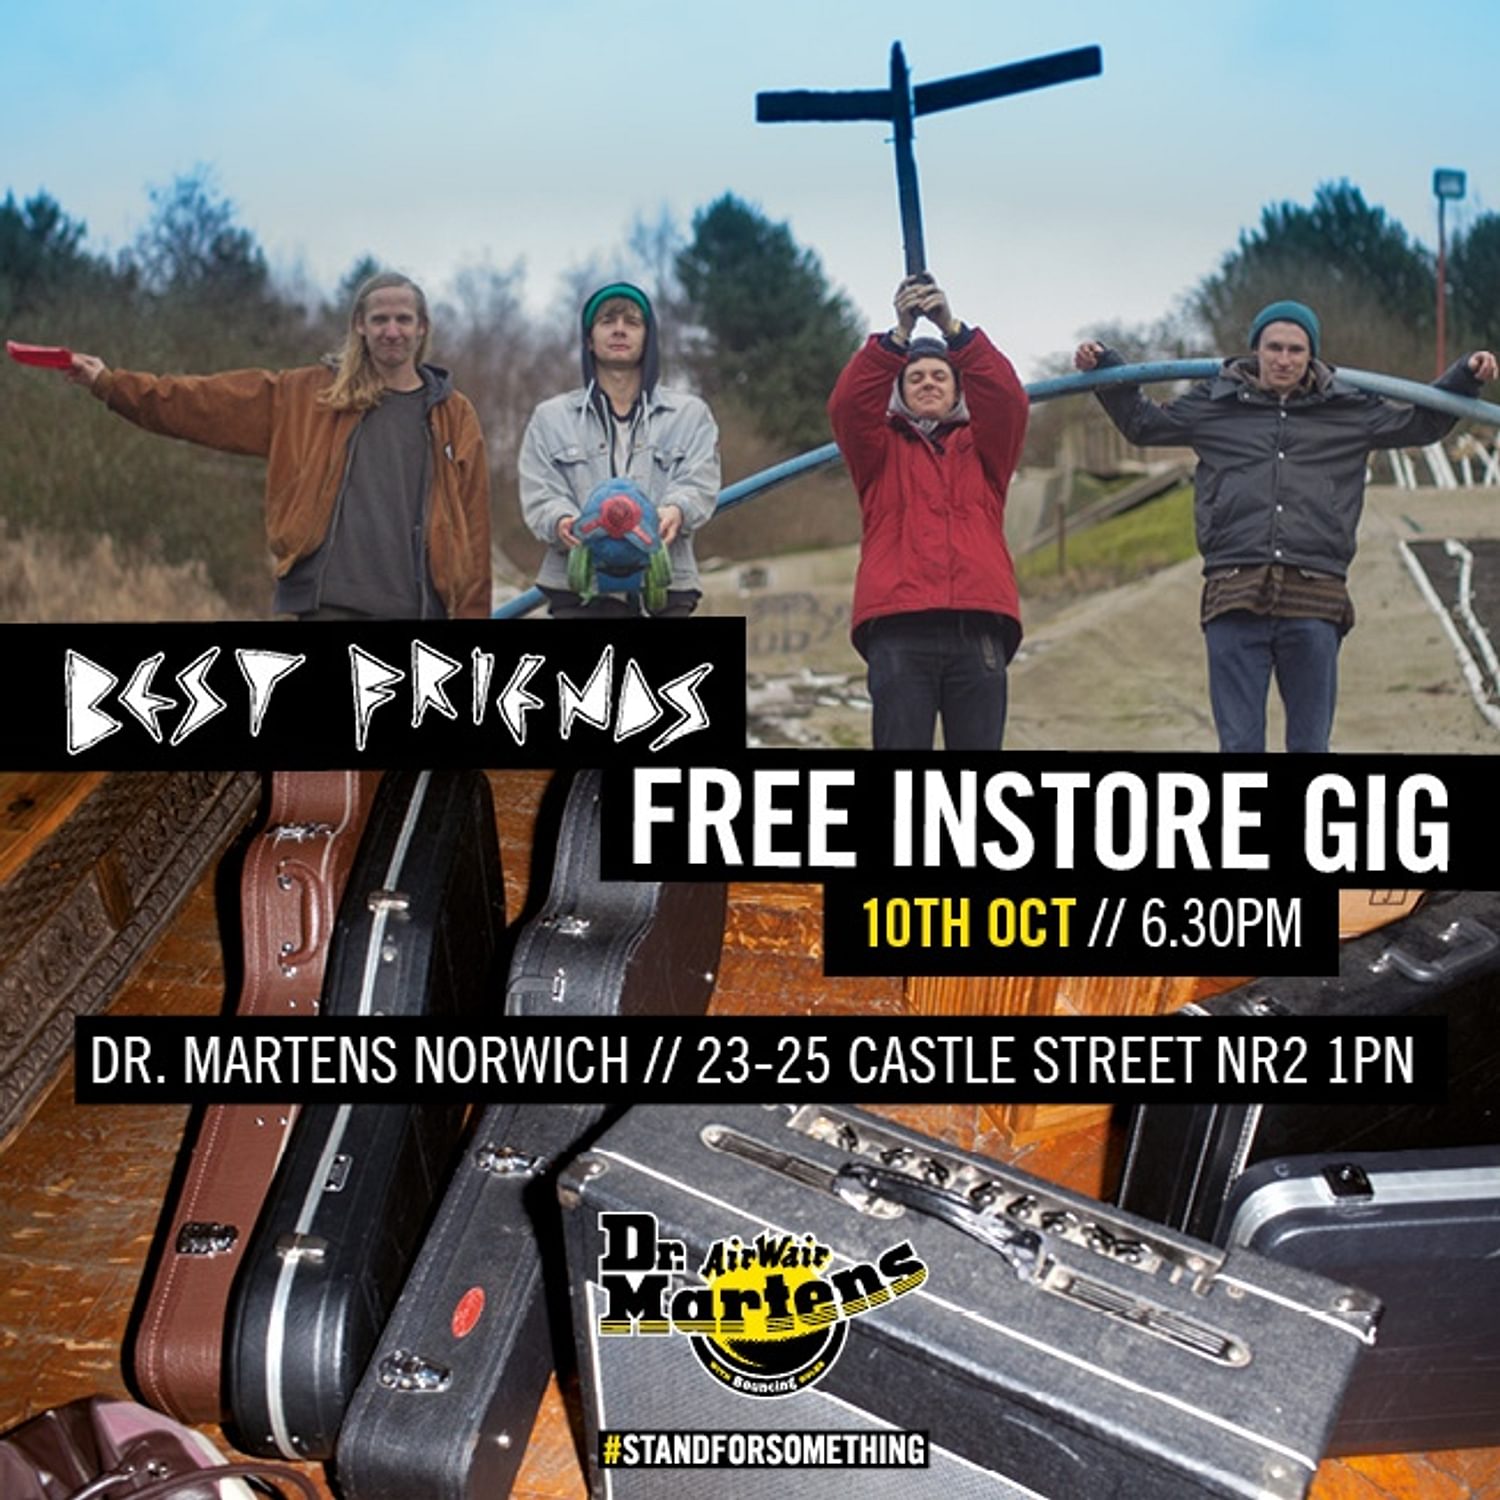 Best Friends to perform at Dr Martens' Norwich store this weekend